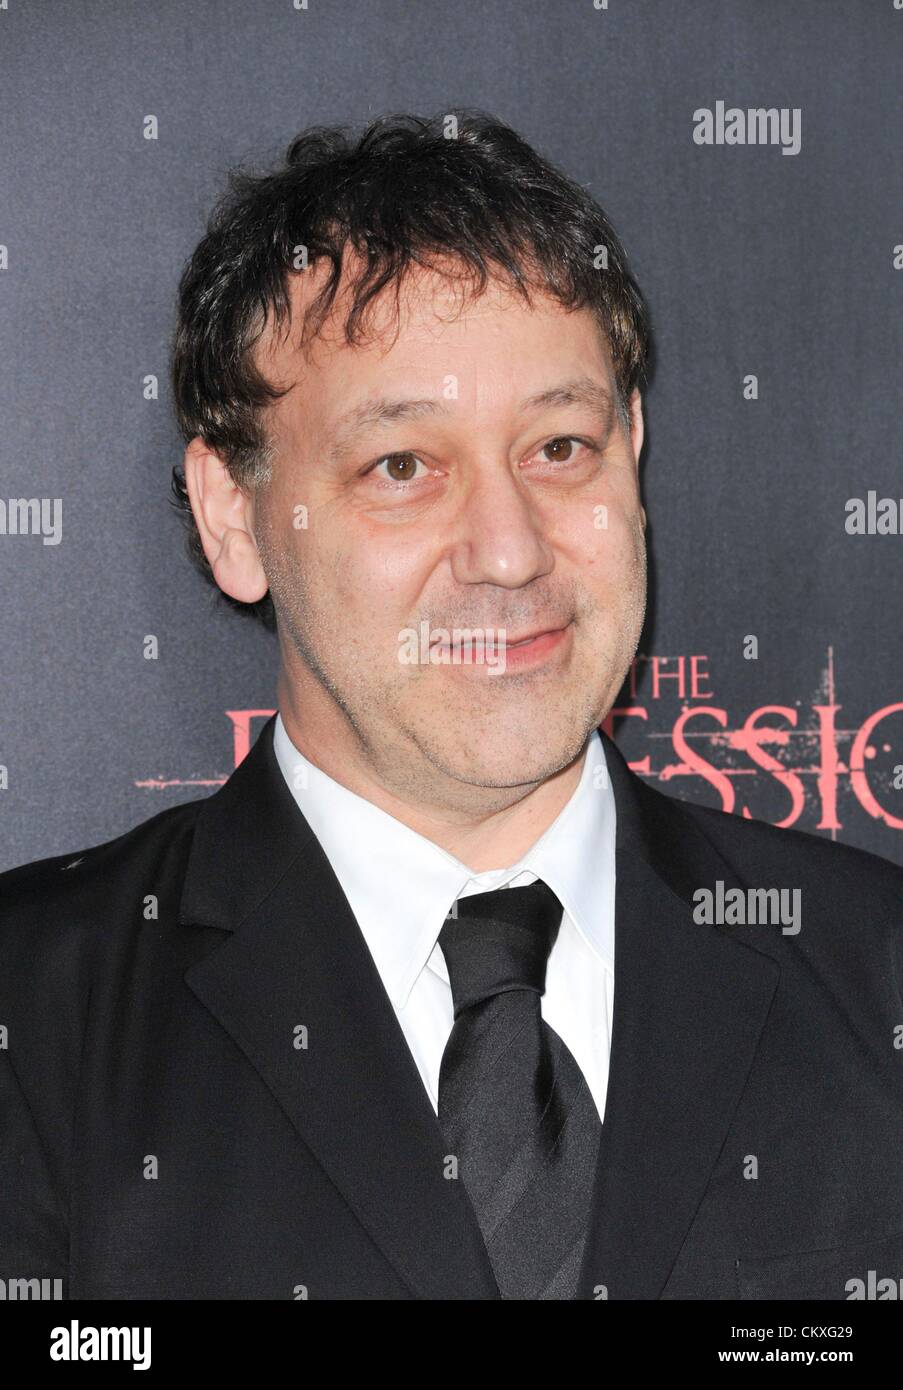 28th Aug 2012. Sam Raimi at arrivals for THE POSSESSION Premiere, The ArcLight Cinemas, Los Angeles, CA August 28, 2012. Photo By: Elizabeth Goodenough/Everett Collection/Alamy Live News Stock Photo